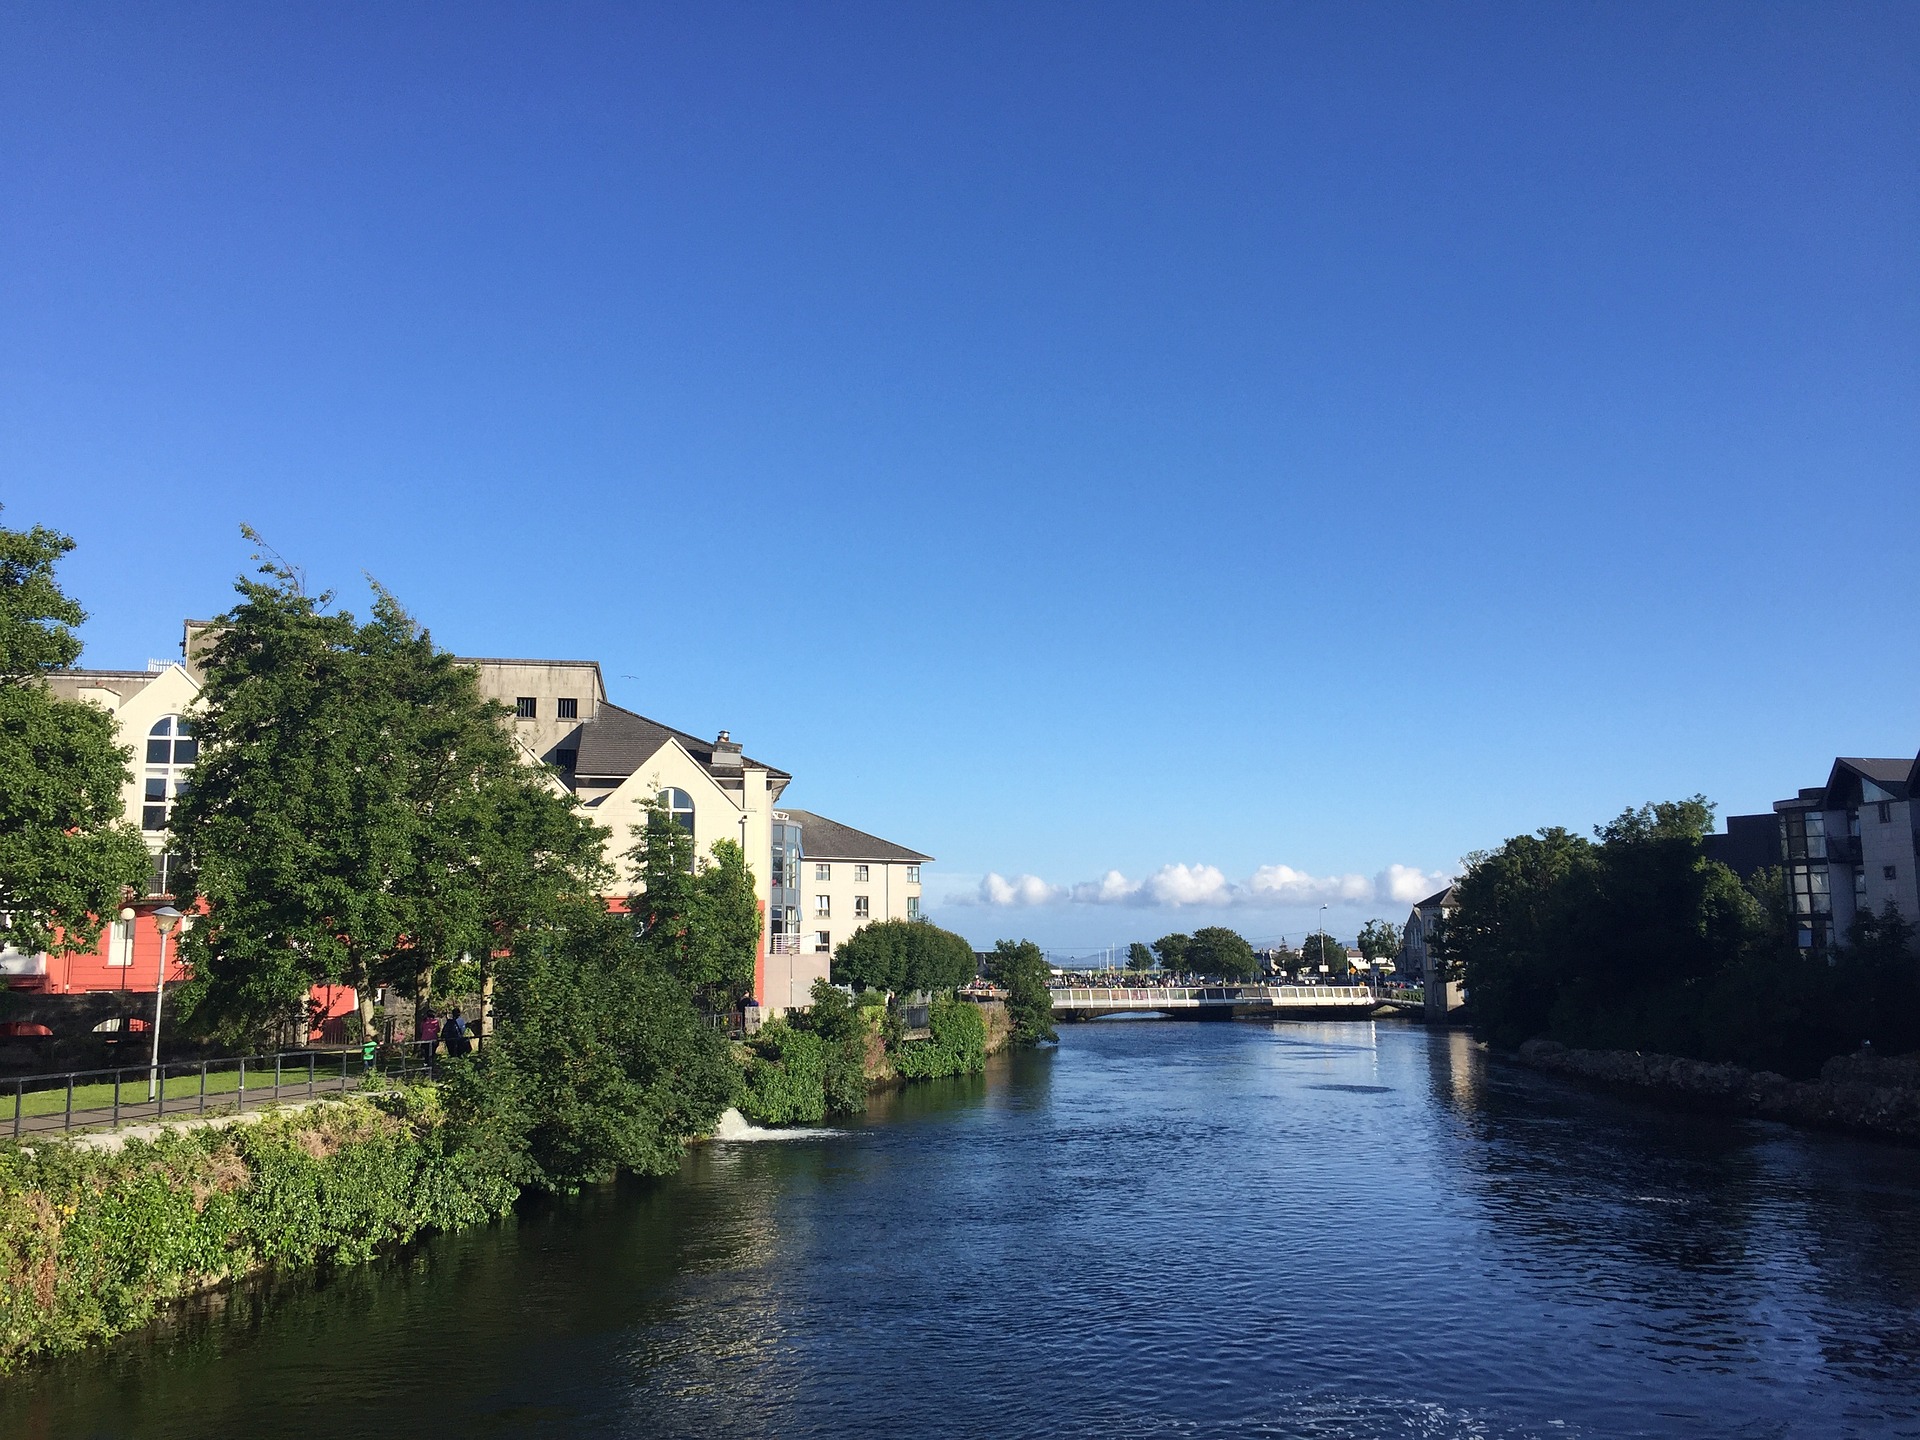 How Cheap is Galway to Visit? – Advice from a Guide